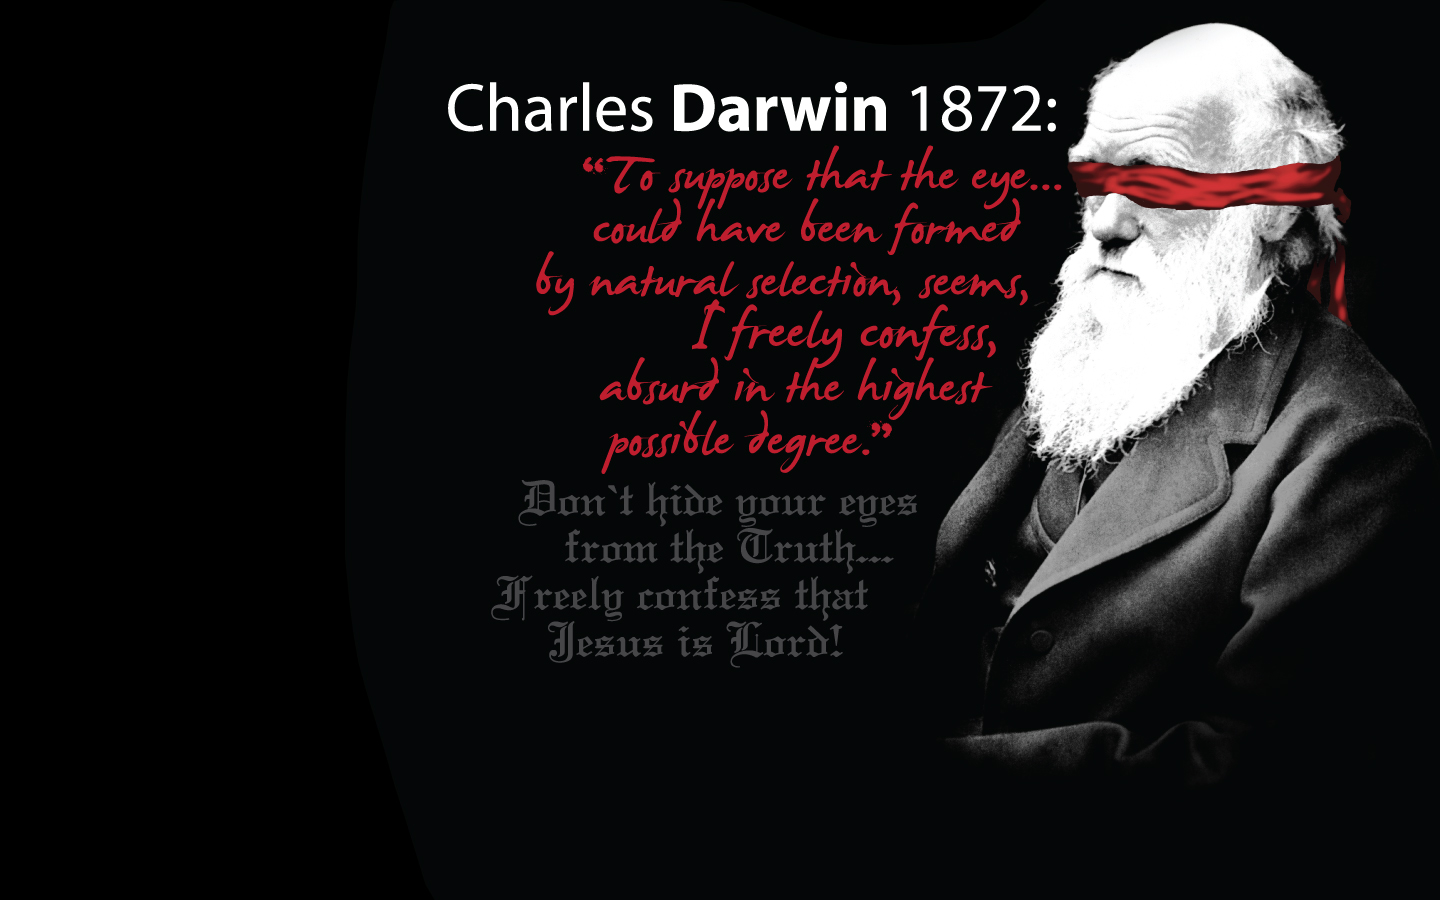 Darwin was Wrong Wallpaper   Christian Wallpapers and Backgrounds